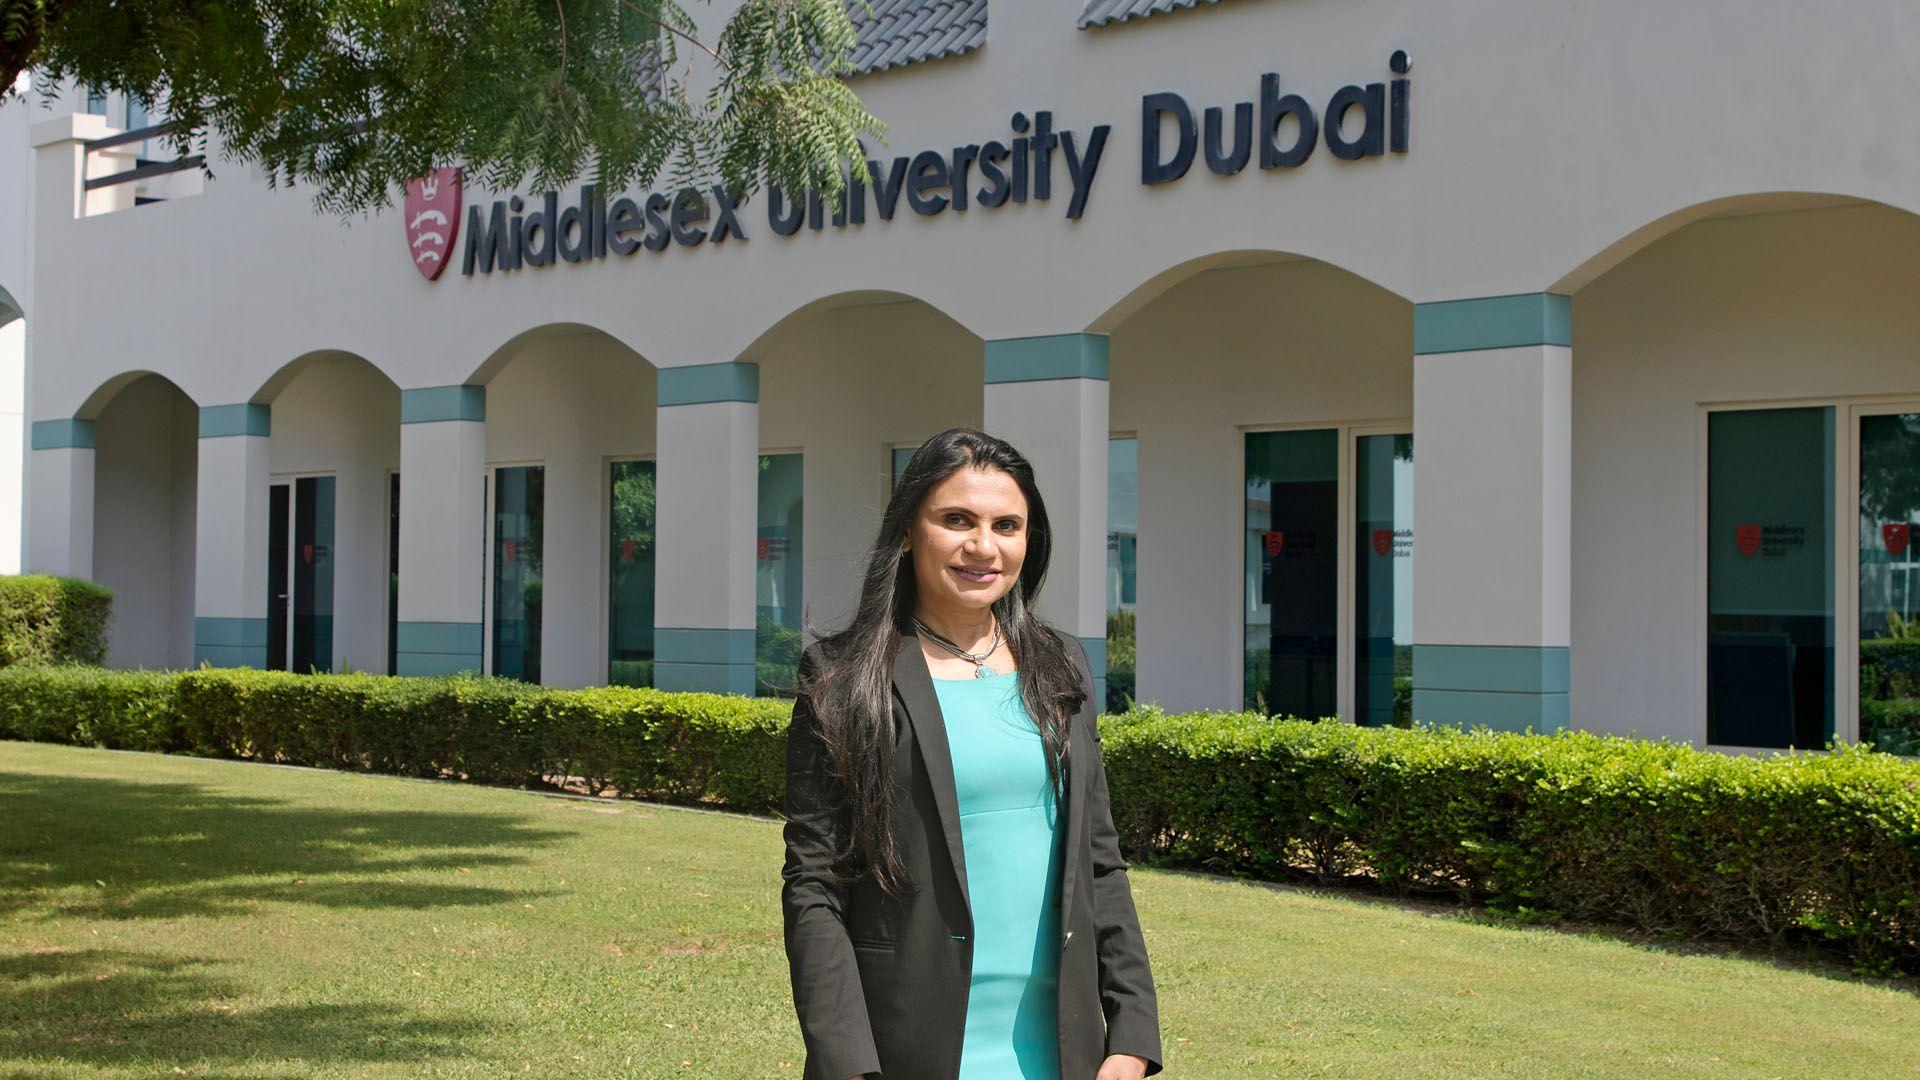 Always ahead of future technologies and industry changes, Middlesex University Dubai is honoured to play a leading role in educating the next generation of law and technology experts in the complexities of digital privacy. 